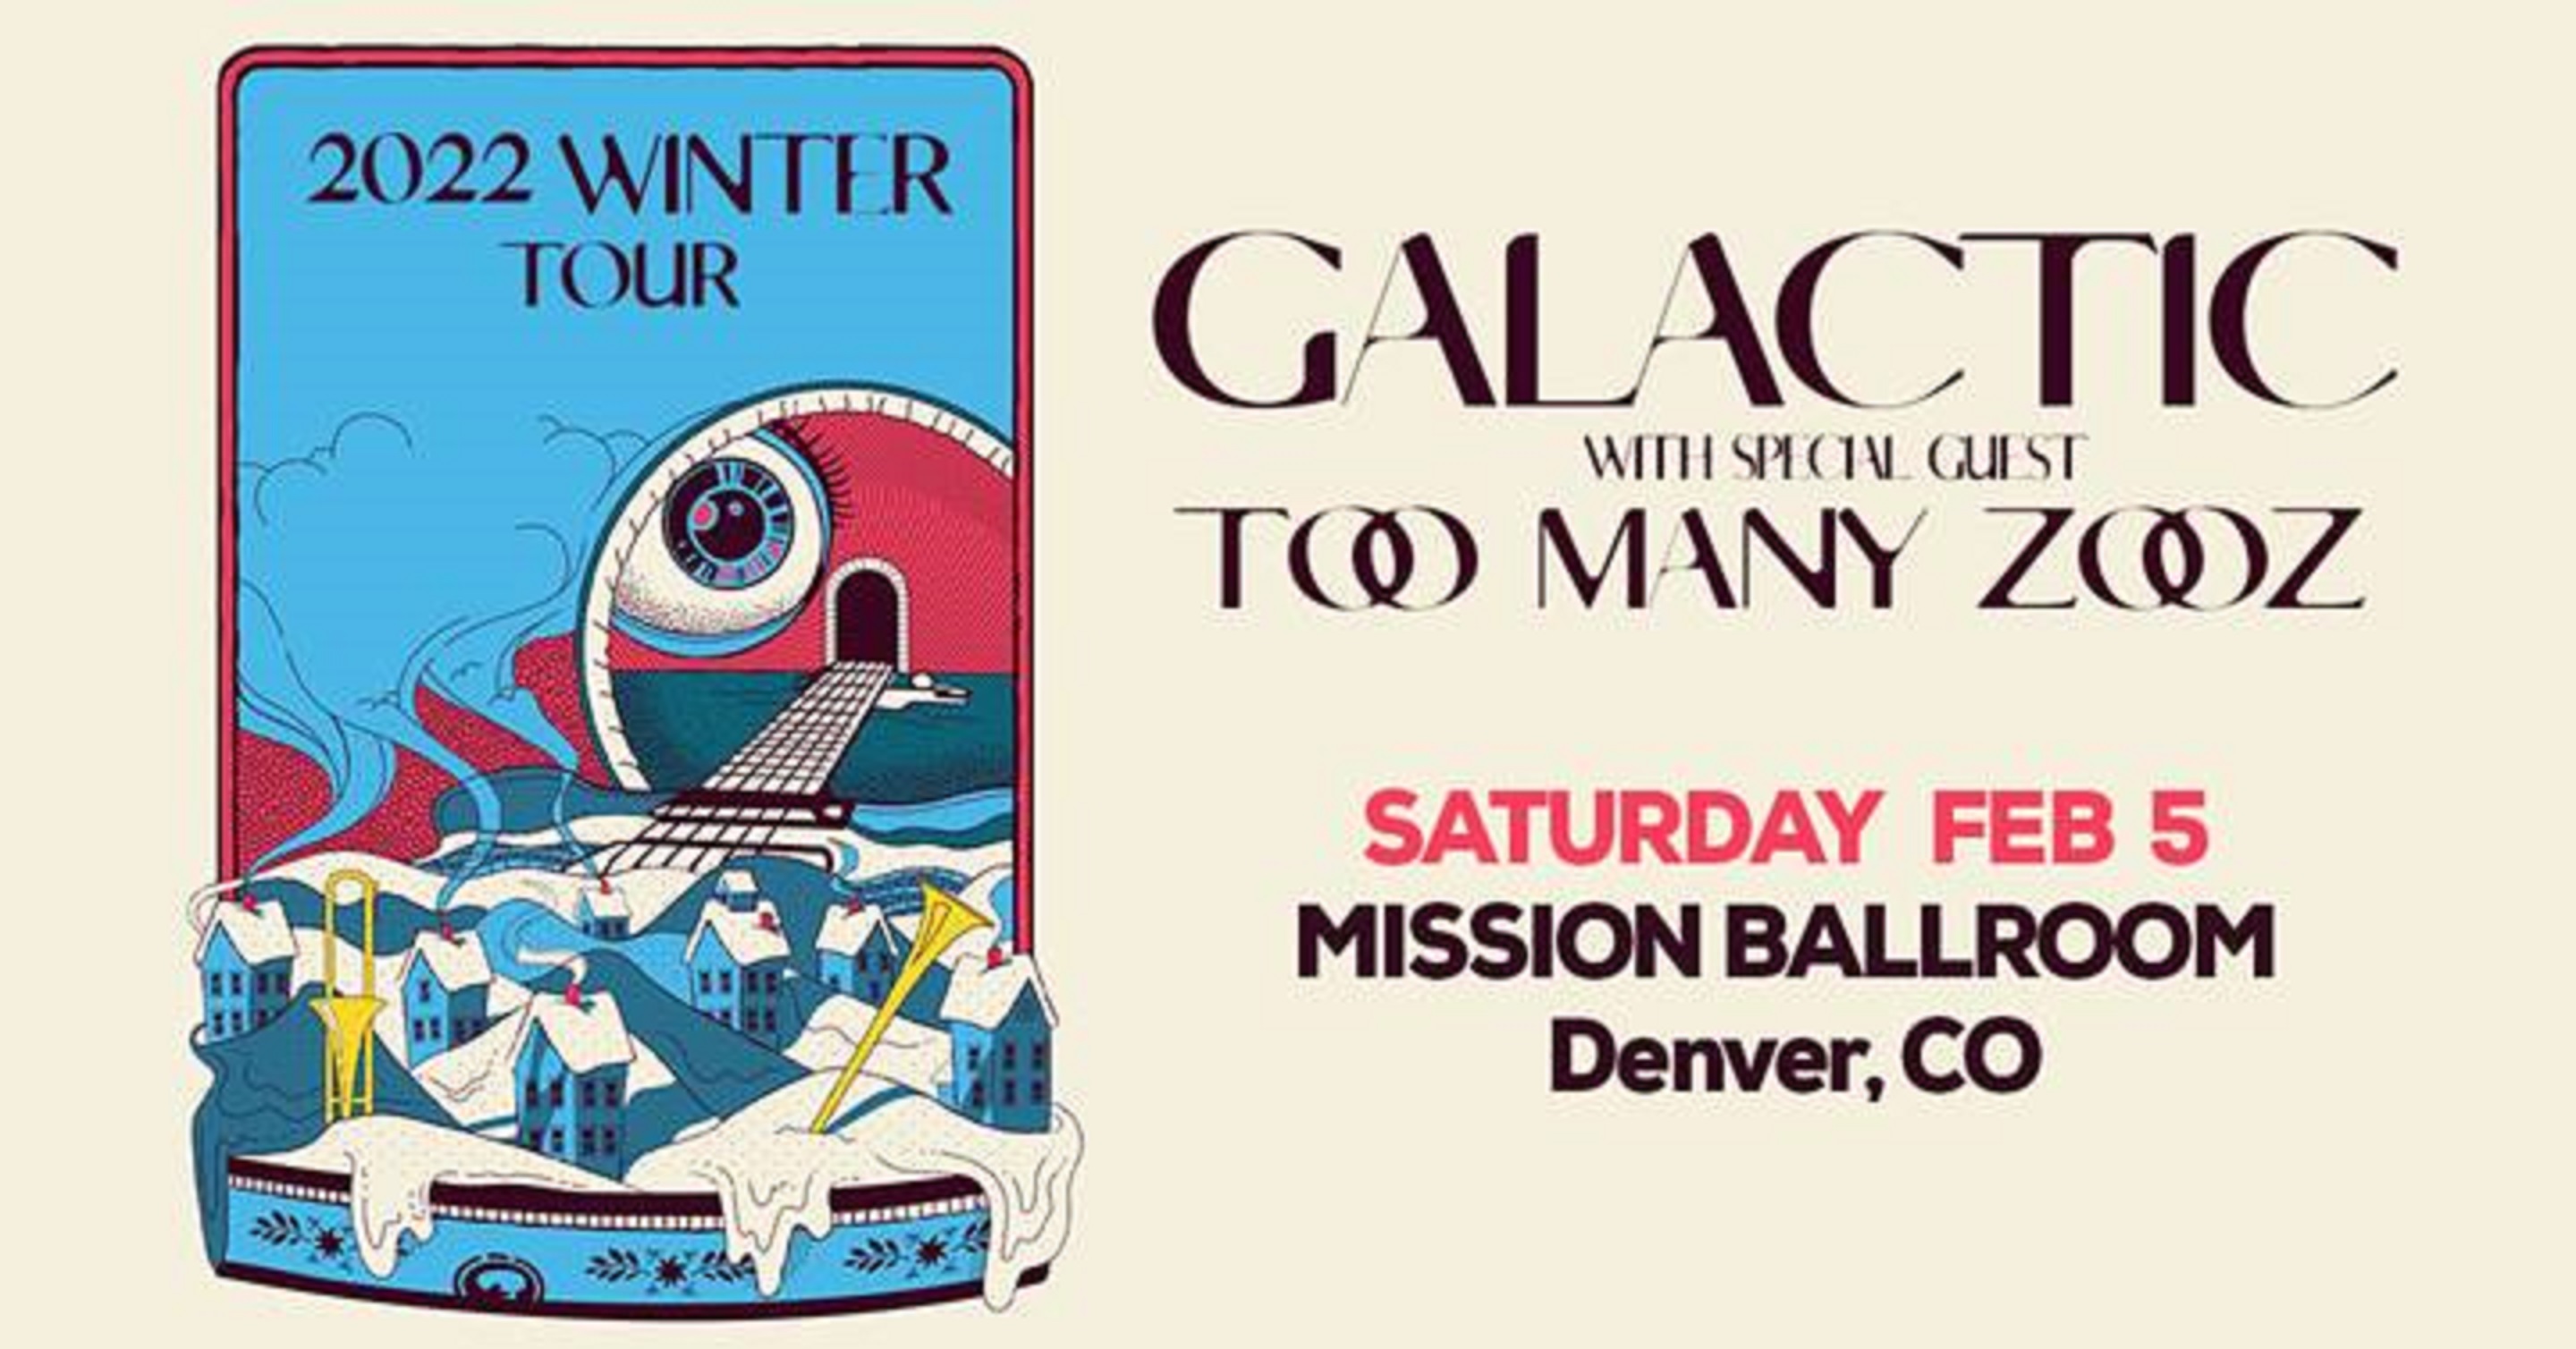 Galactic to play Mission Ballroom February 5th, 2022